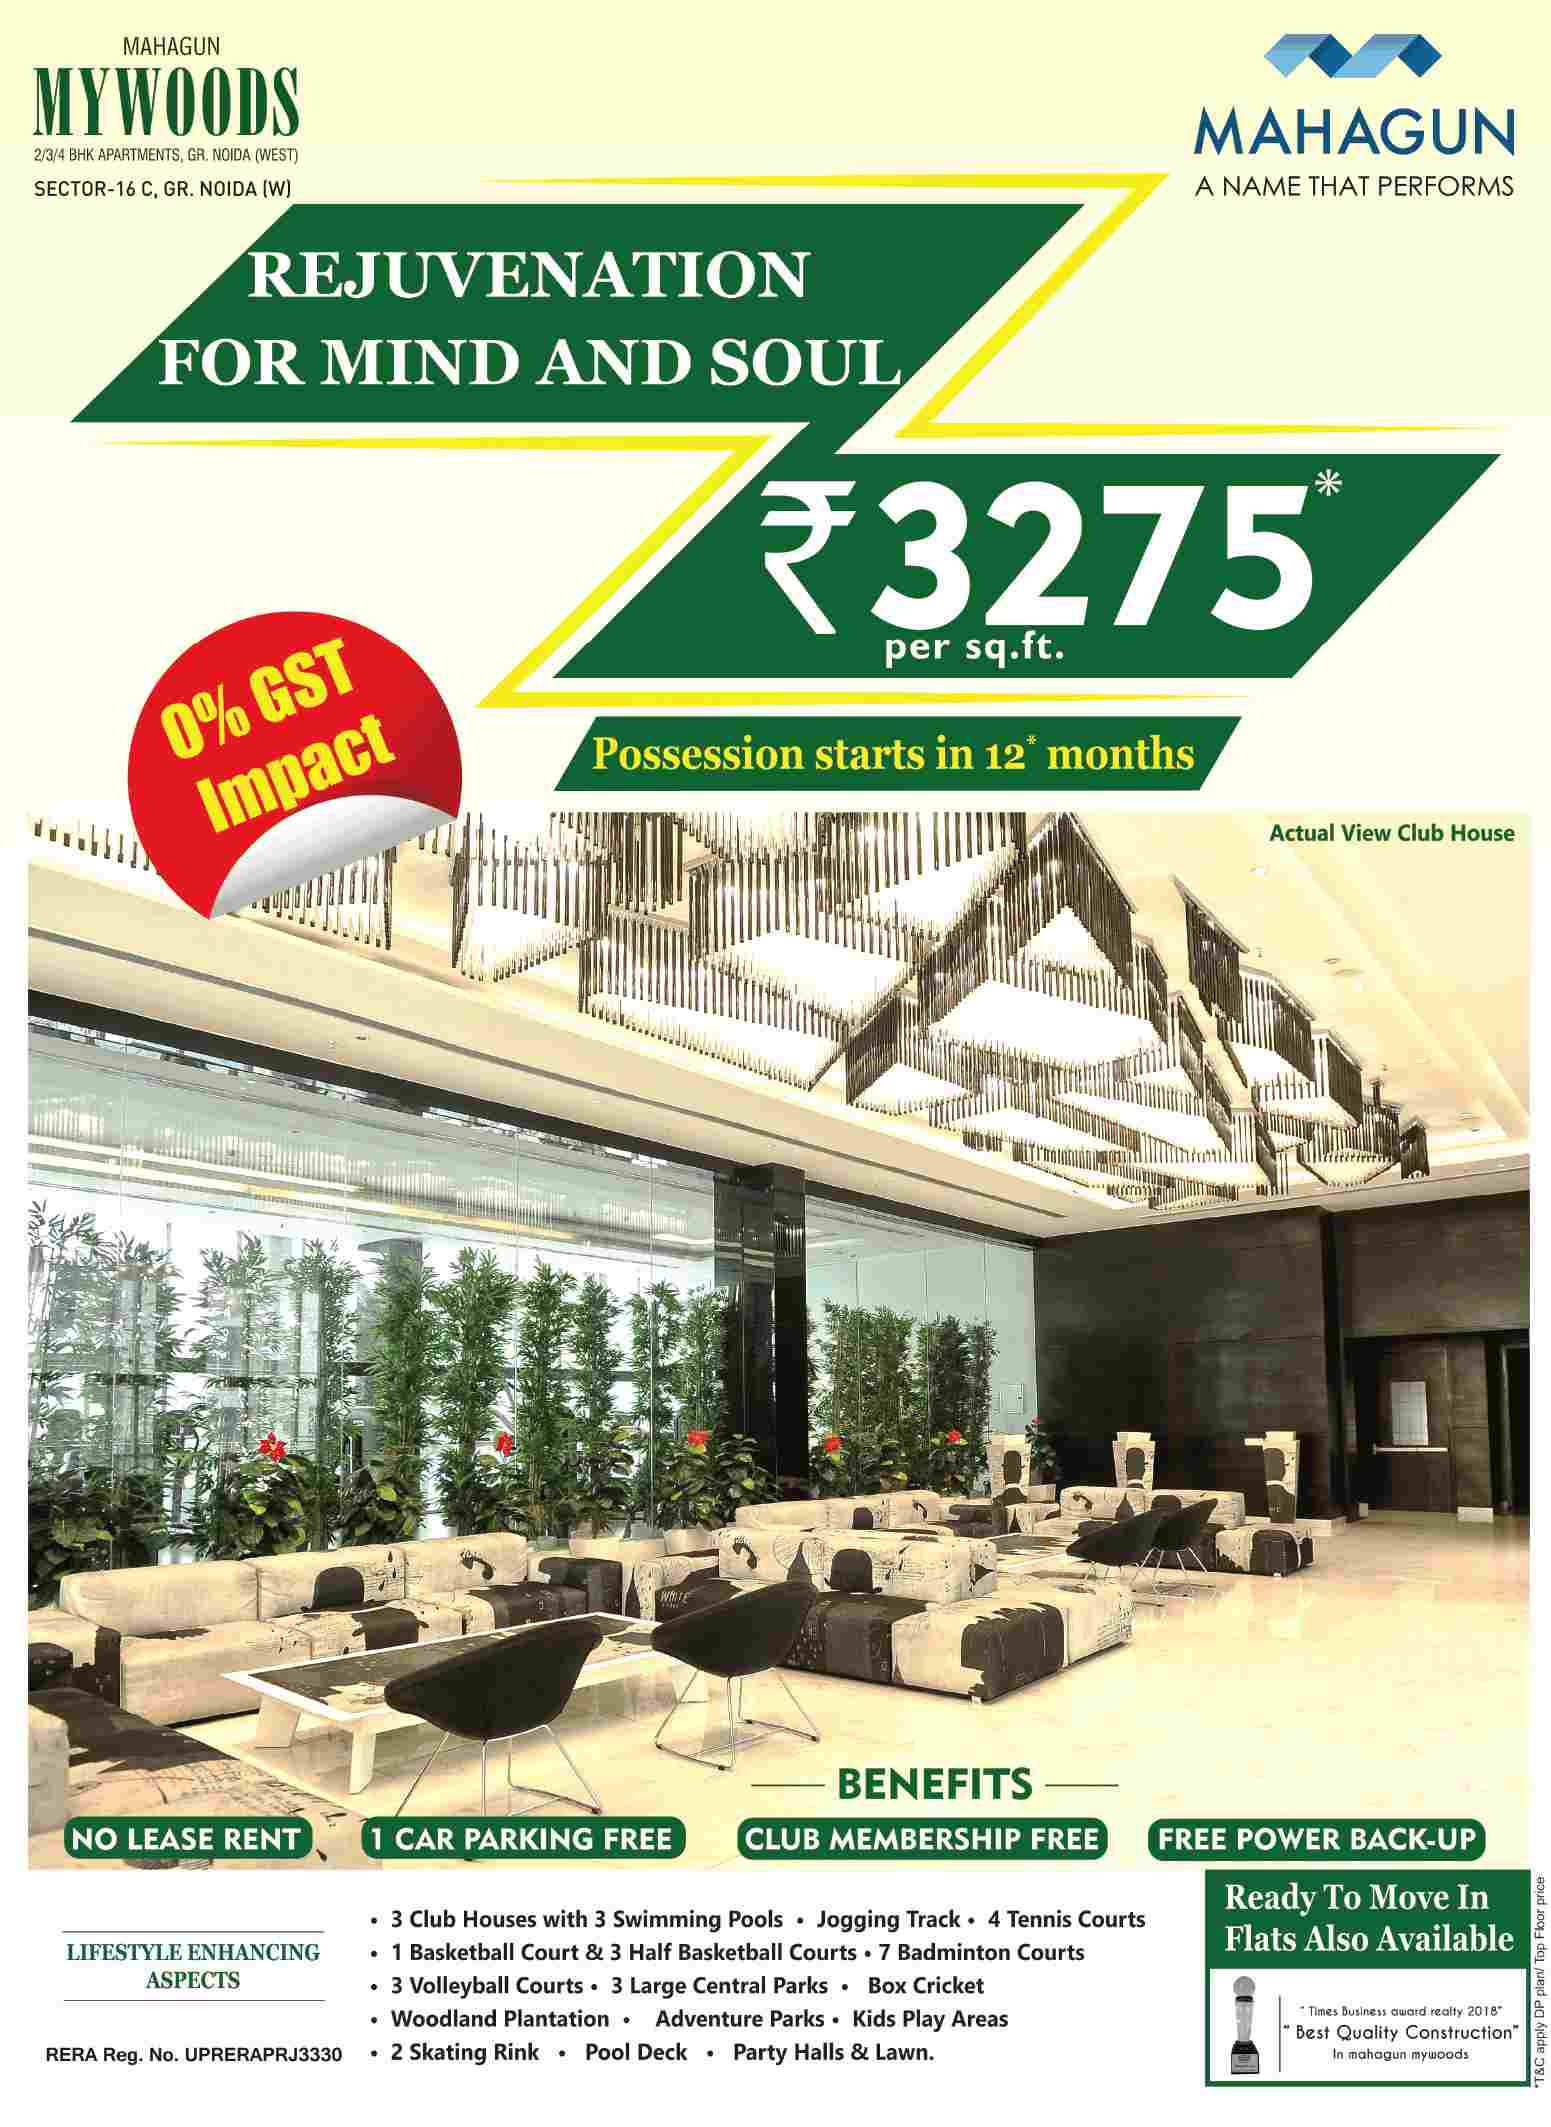 Rejuvenation for mind and soul @ Rs. 3275 per sqft. at Mahagun Mywoods in Greater Noida Update